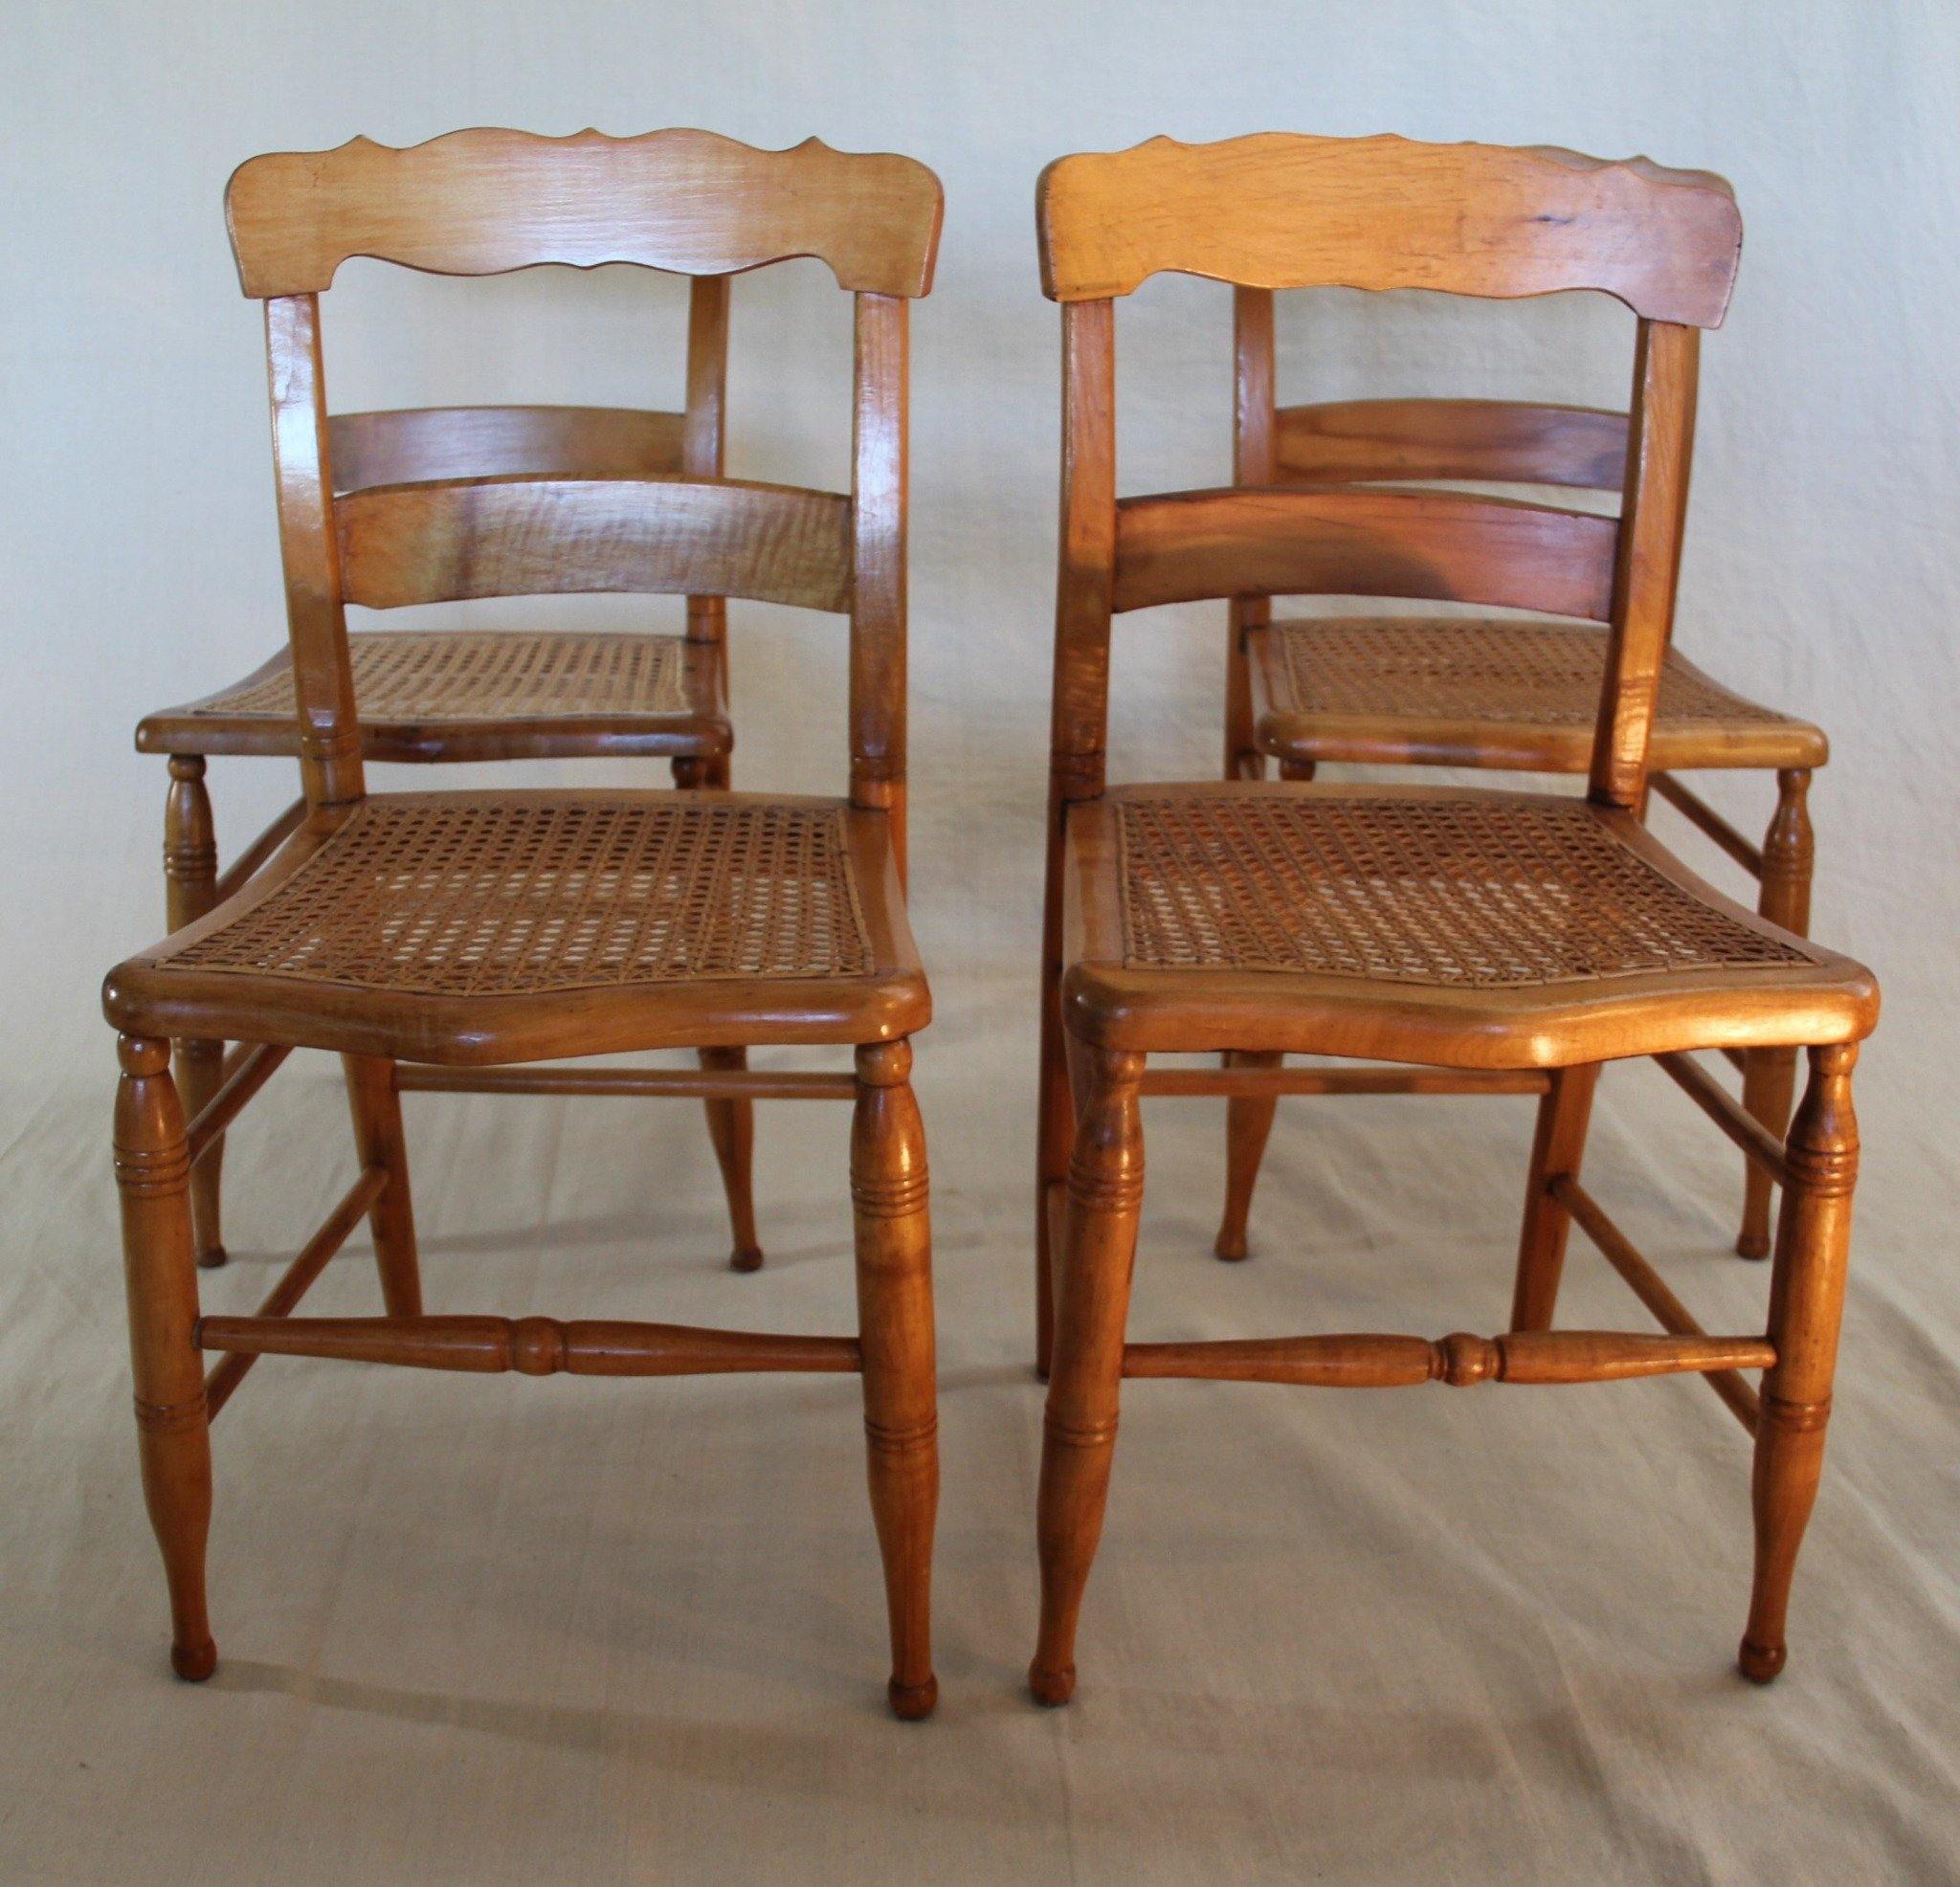 Front View of four Pine chairs with cane seats-Cook Street Vintage